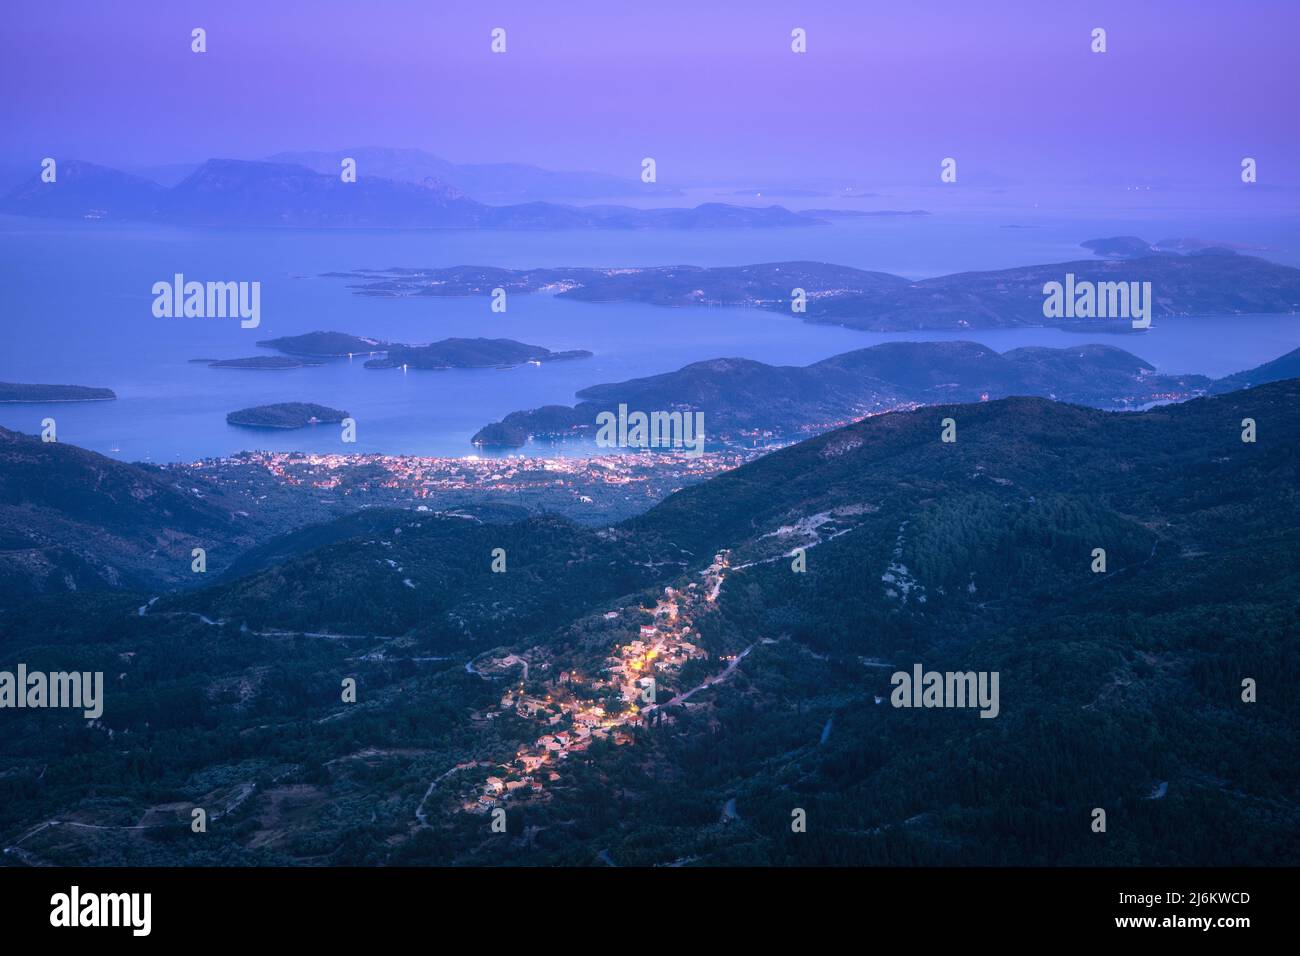 Small village in the mountain and city on the sea cost at night Stock Photo